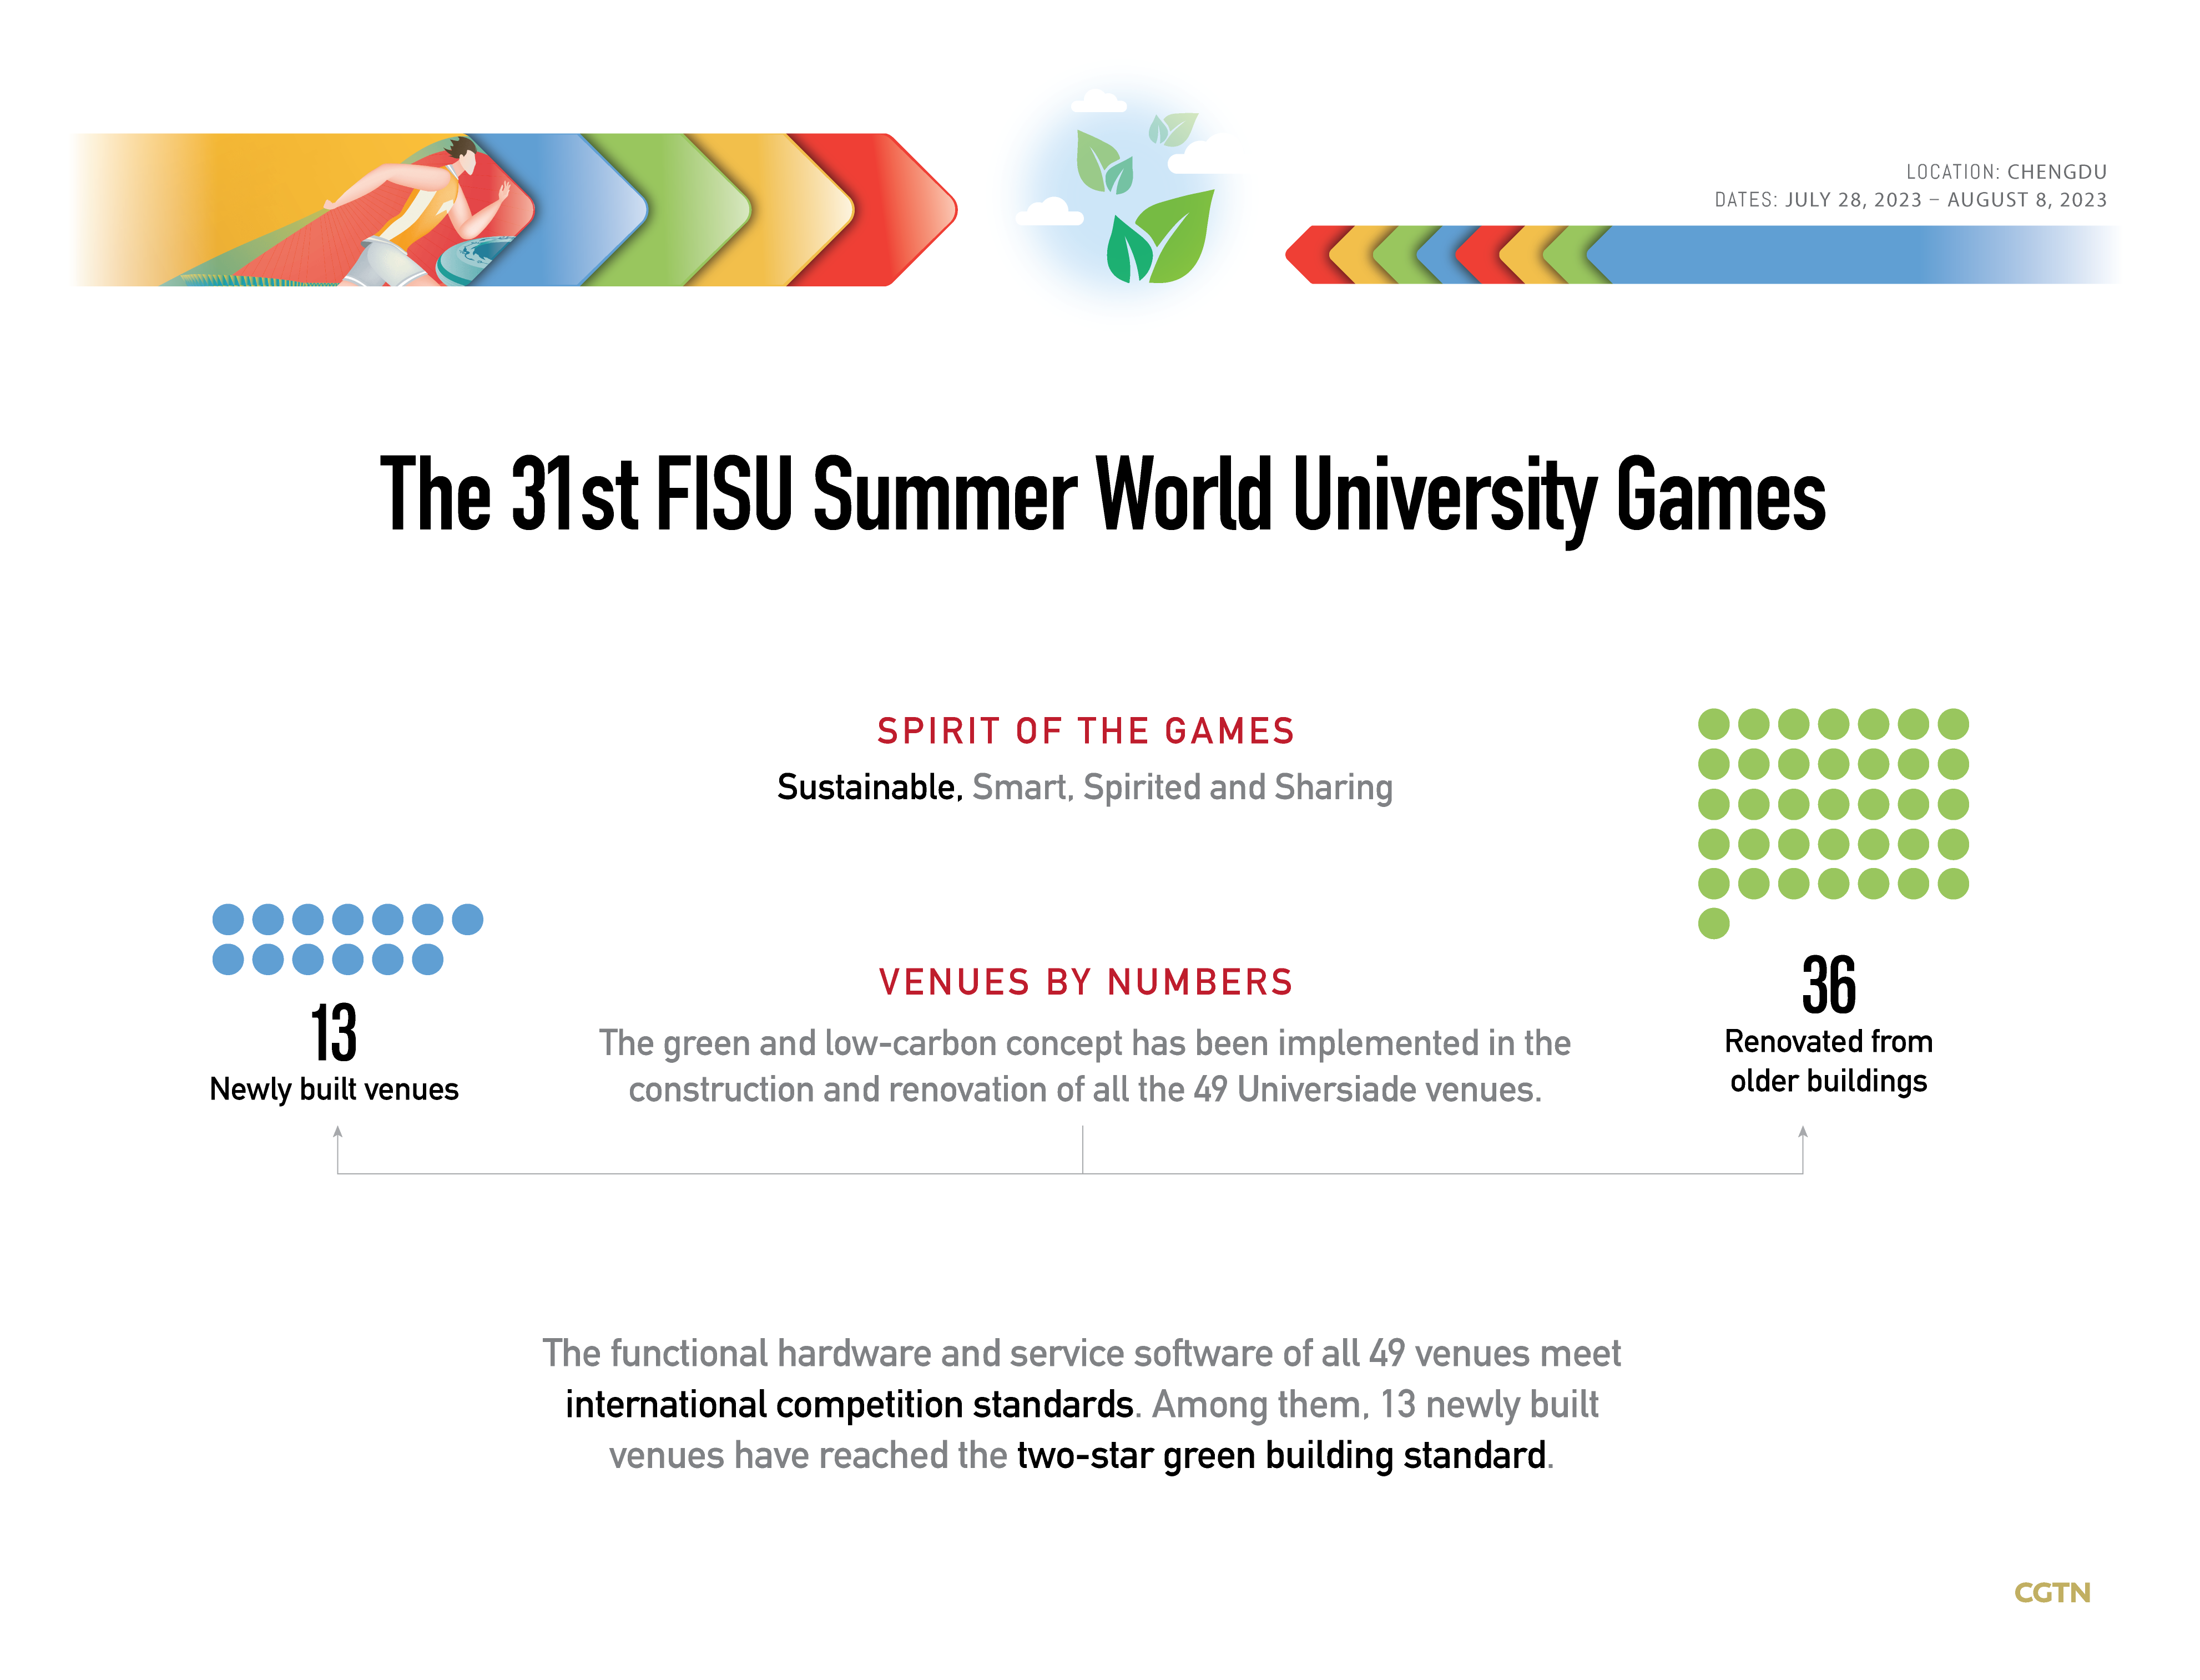 Unboxing green Universiade: The green and low-carbon venues